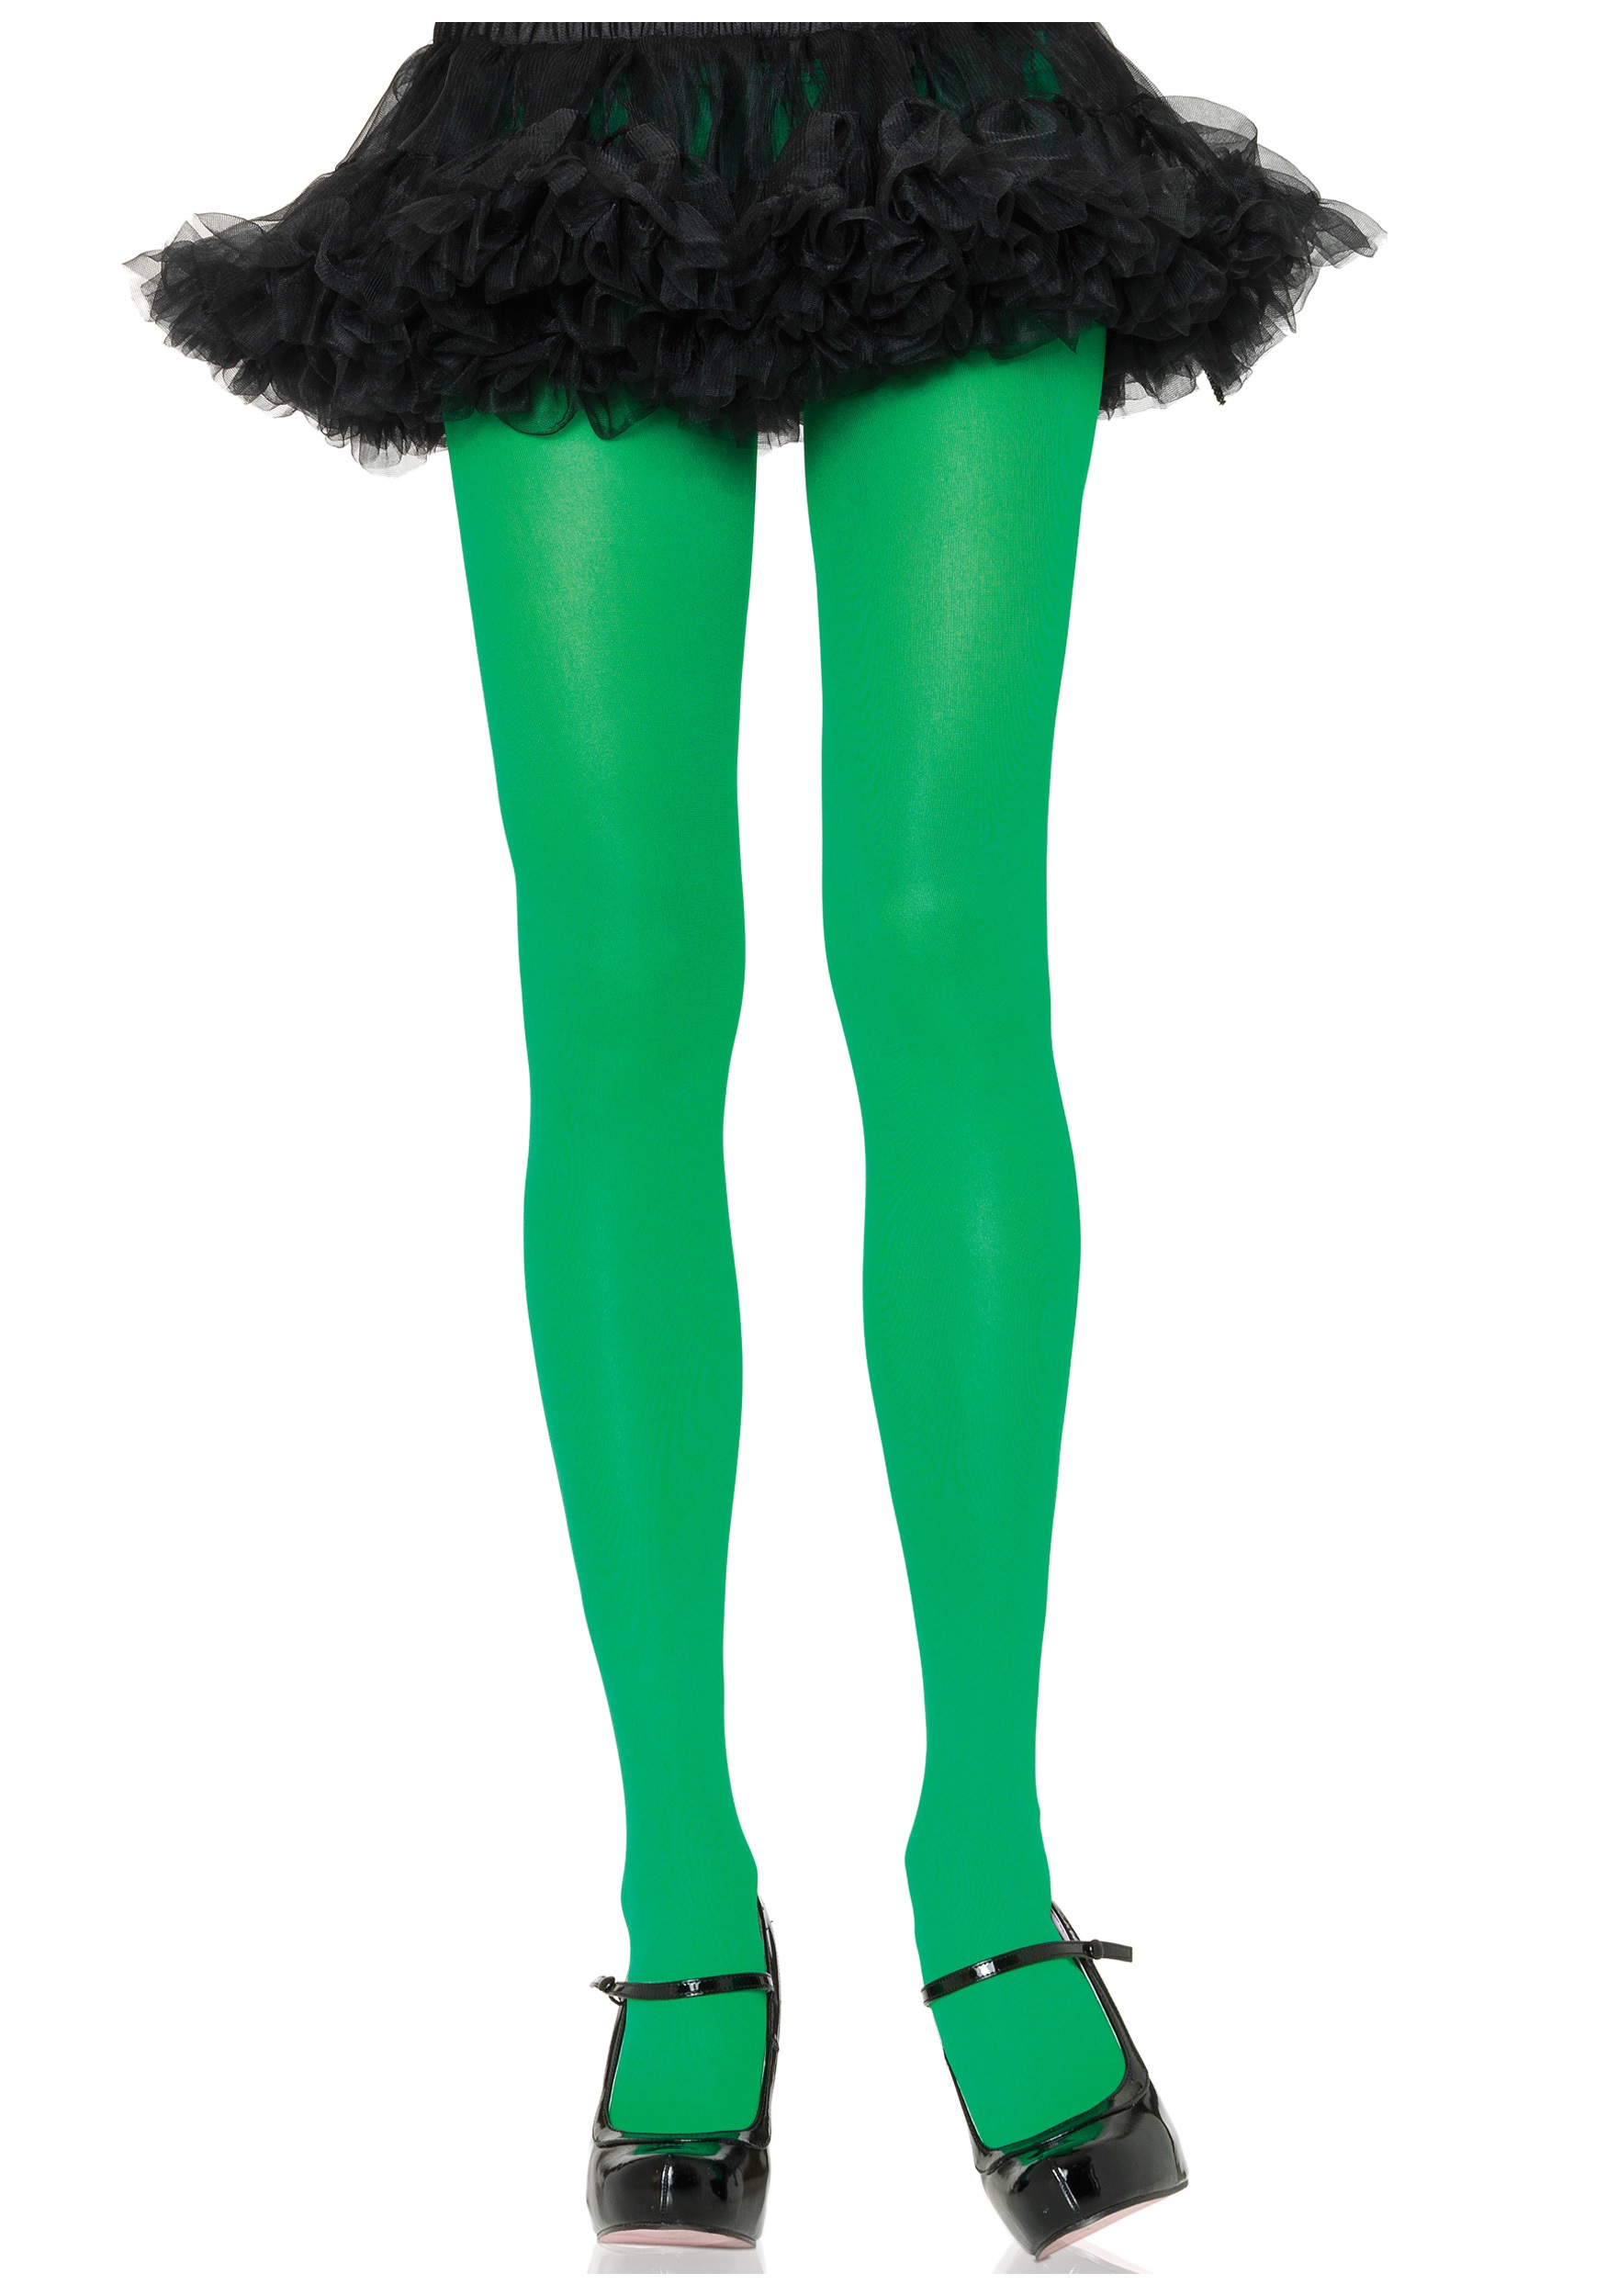 https://images.fun.com/products/6625/1-1/womens-nylon-kelly-green-tights.jpg